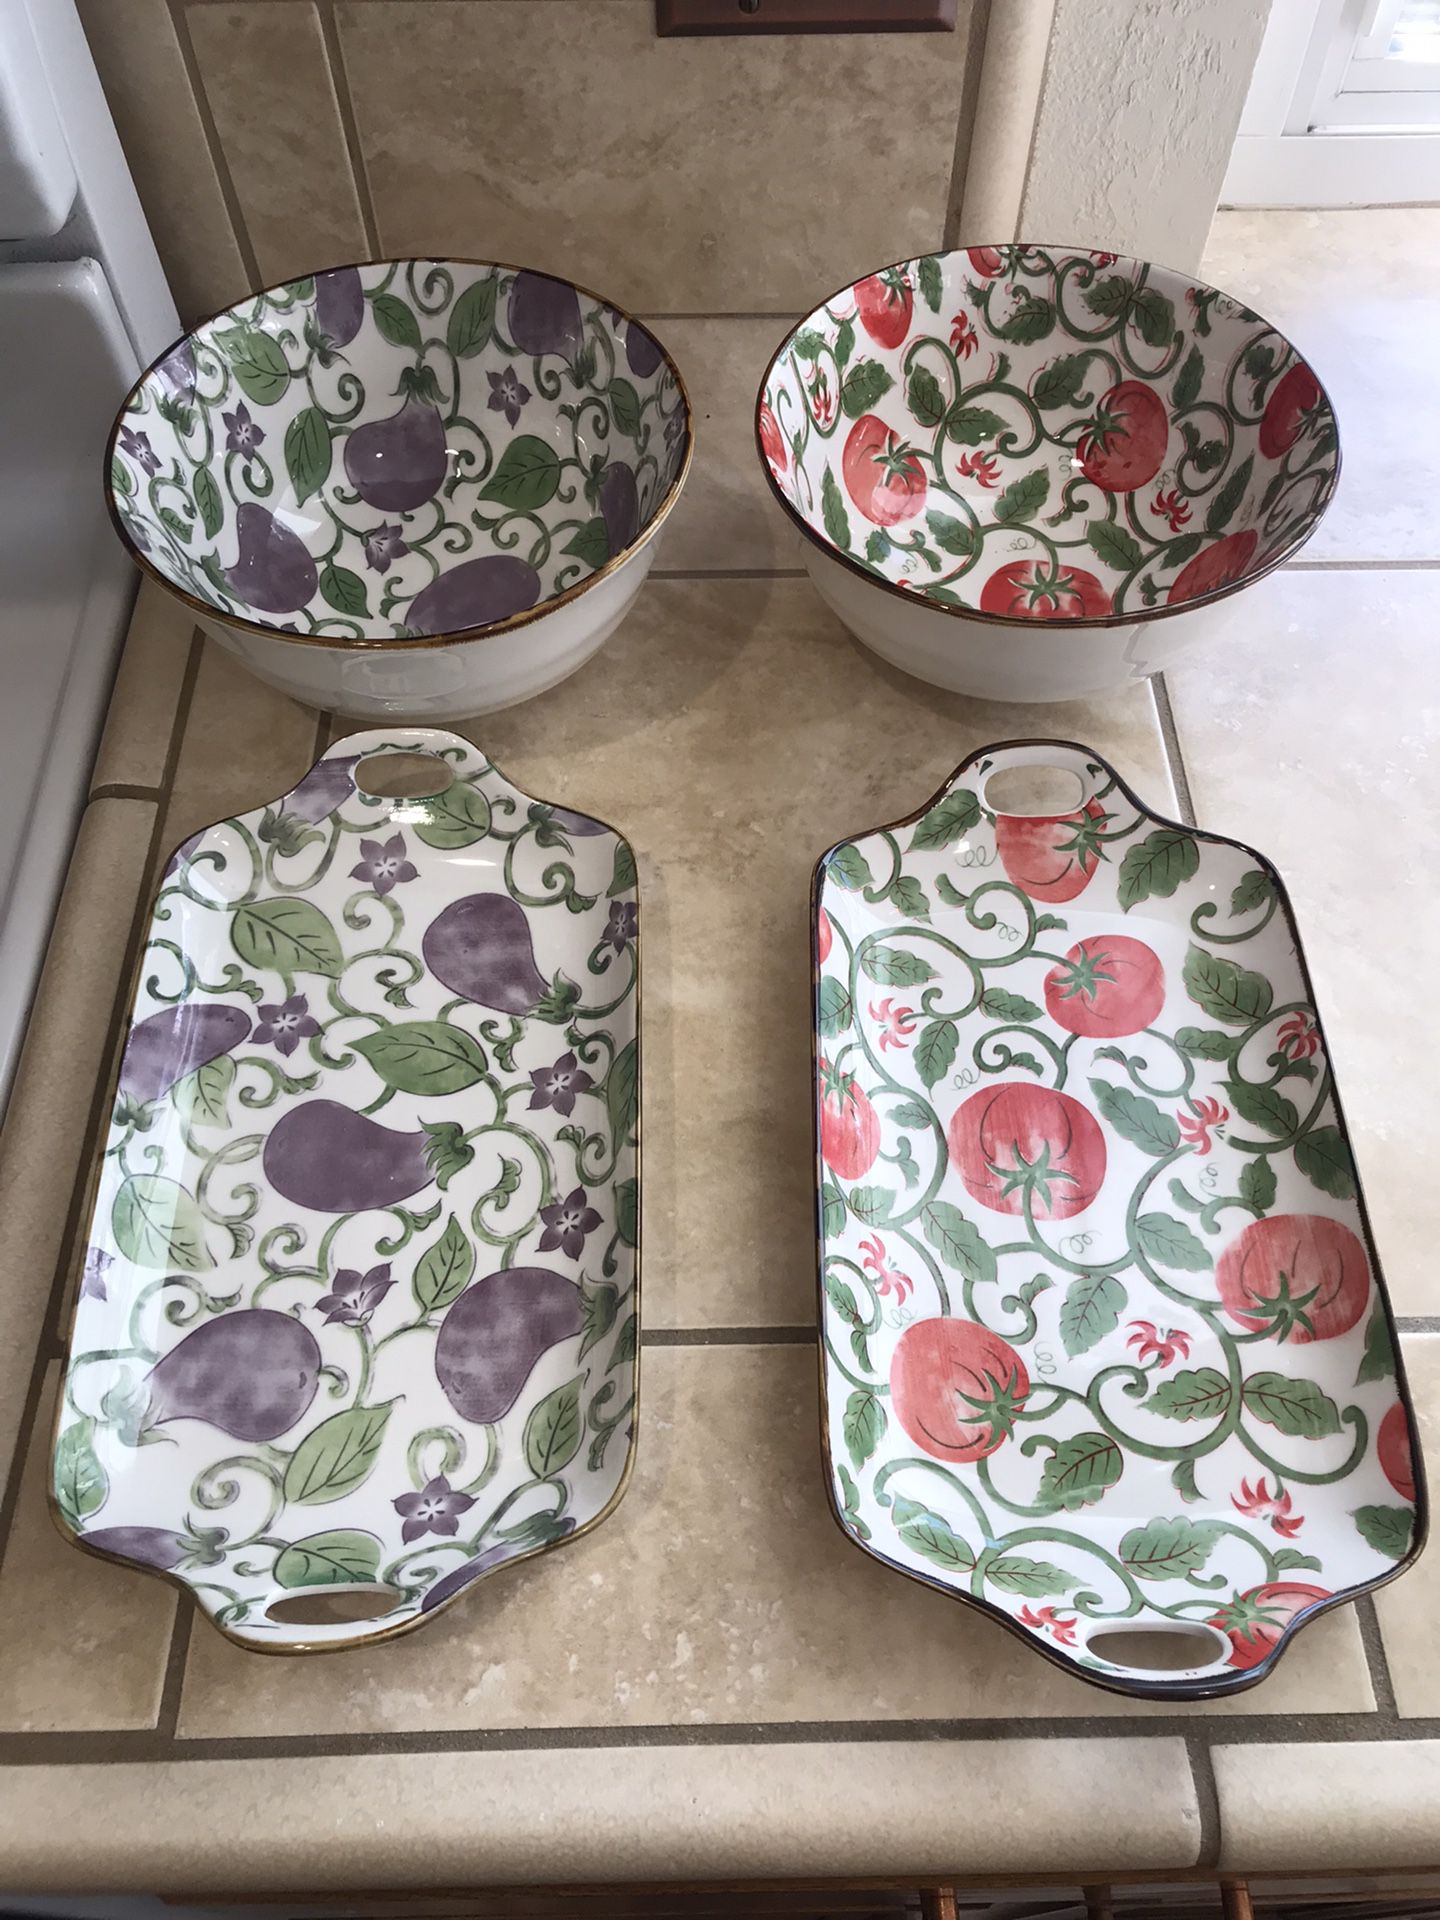 Eggplant and Tomato Vine Bowls And Serving Plates